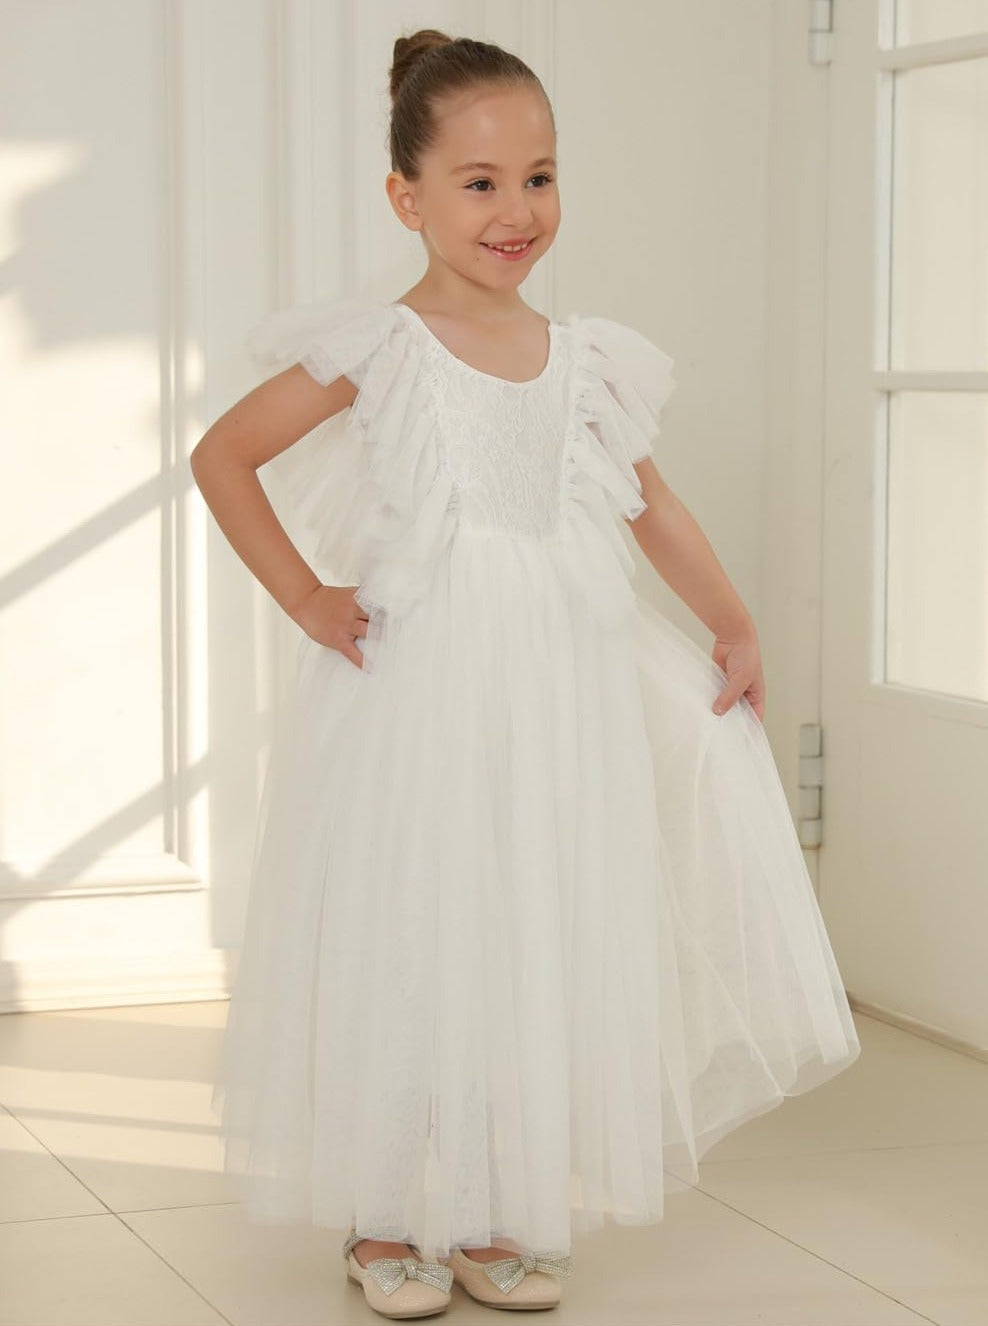 Paisley Lace Flower Girl Dress in White